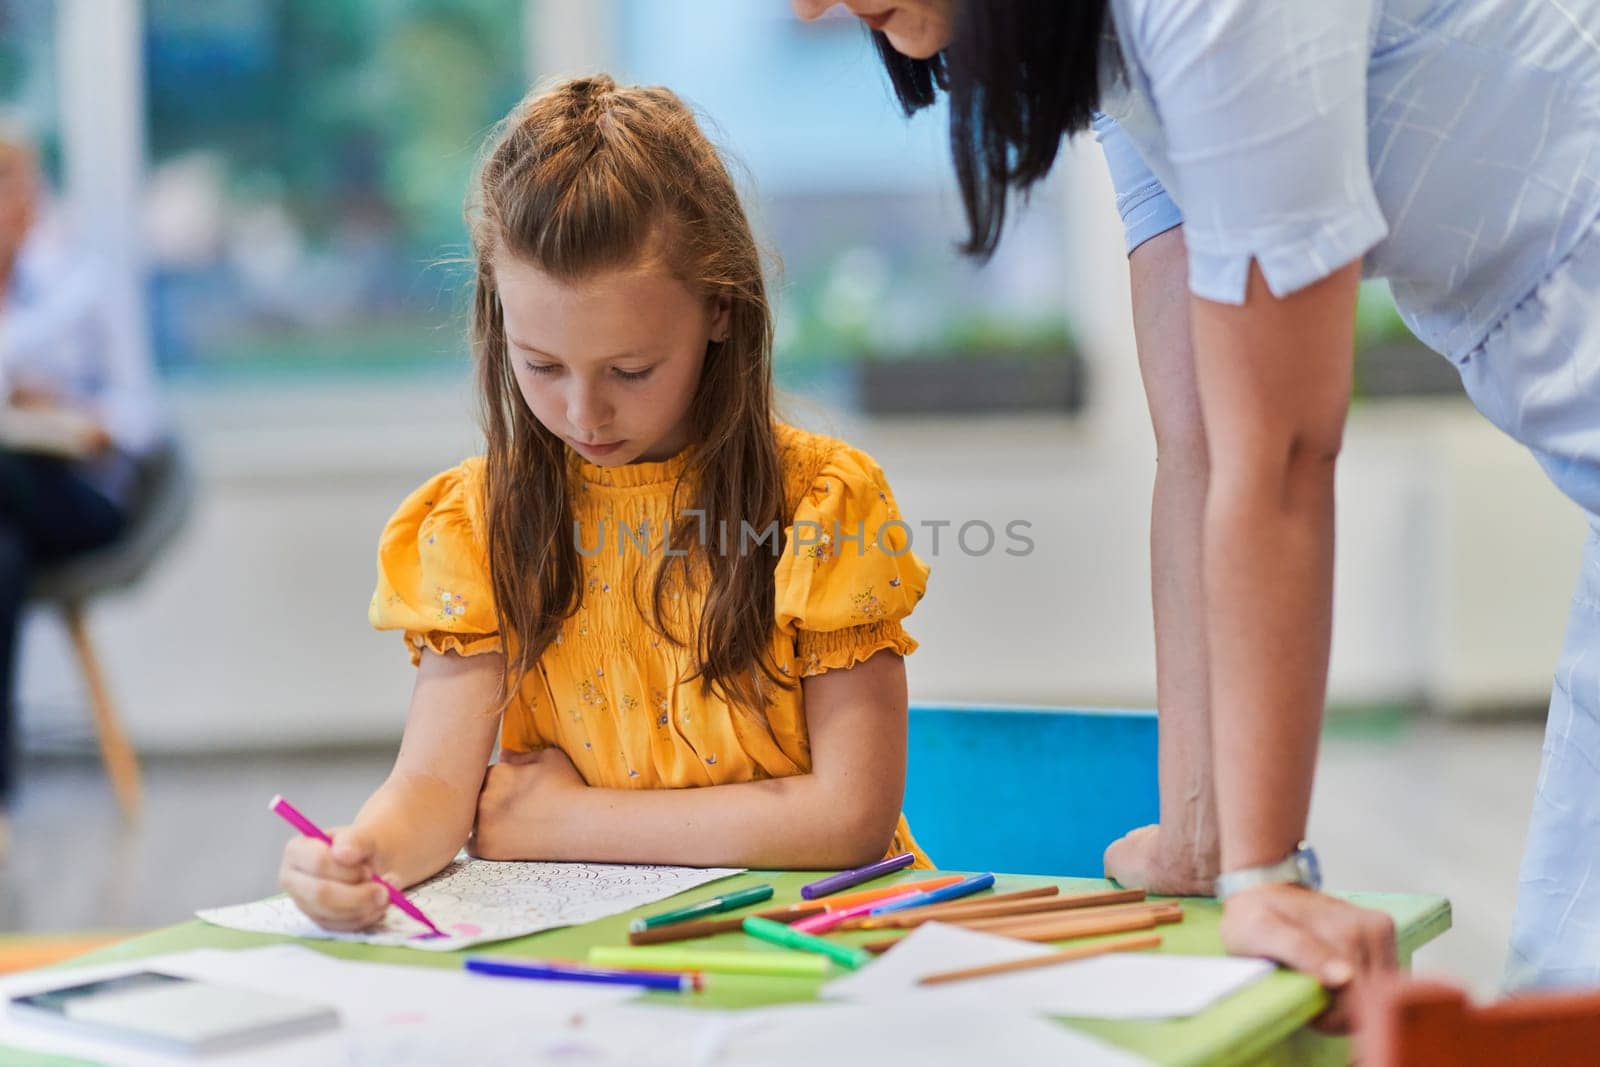 Creative kids during an art class in a daycare center or elementary school classroom drawing with female teacher